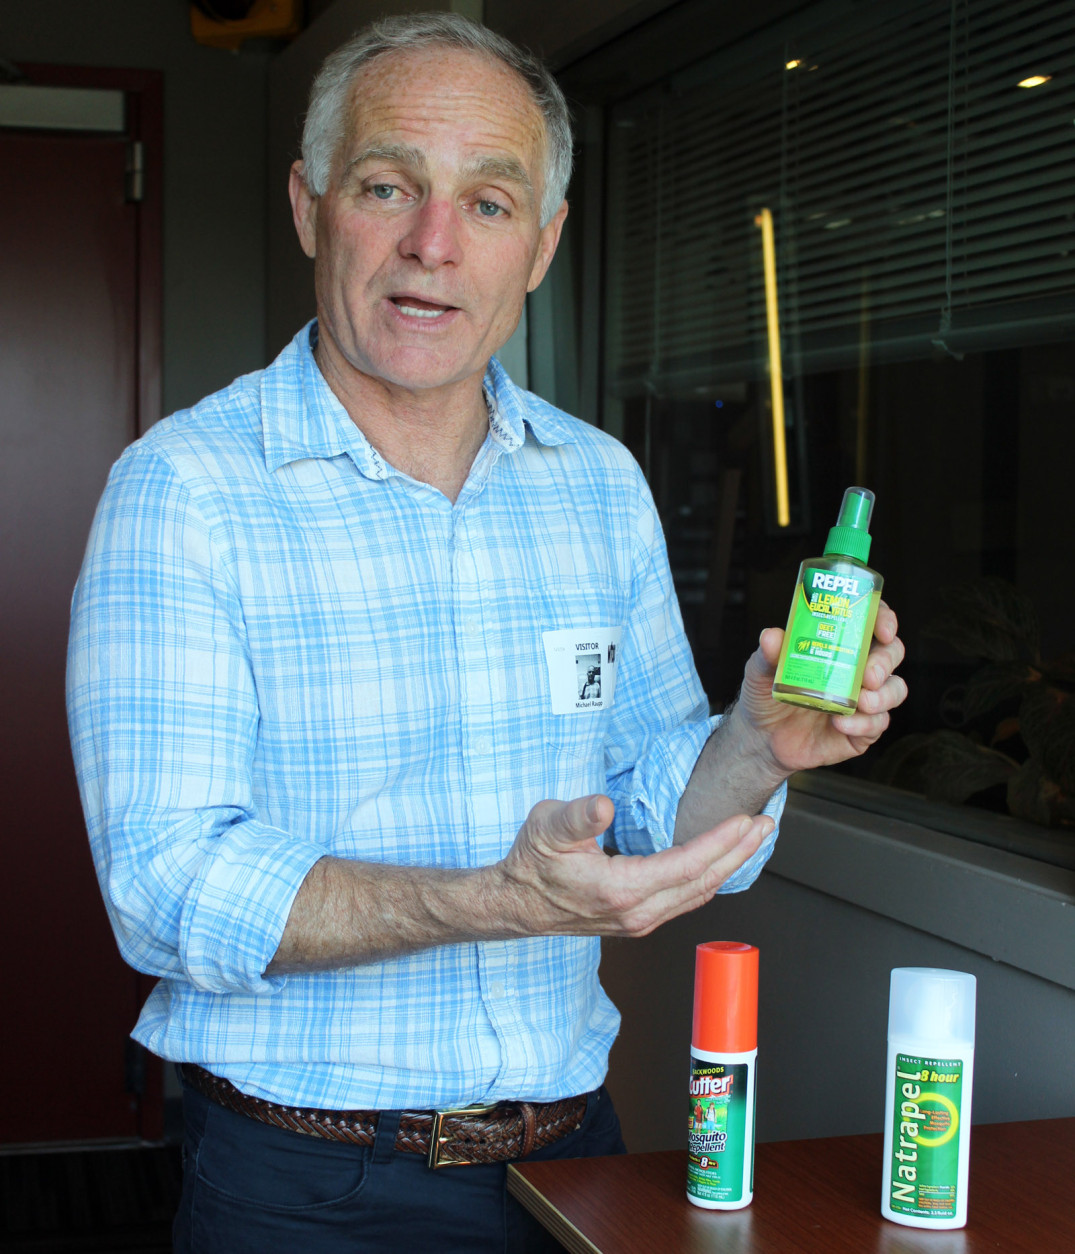 Mike Raupp, professor of entomology at the University of Maryland at College Park, says non-DEET mosquito repellents like this lemon eucalyptus product can effectively protect against Zika-carrying mosquitoes. Raupp visited the Glass Enclosed Nerve Center on Monday, May 2, 2016. (WTOP/Amanda Iacone)